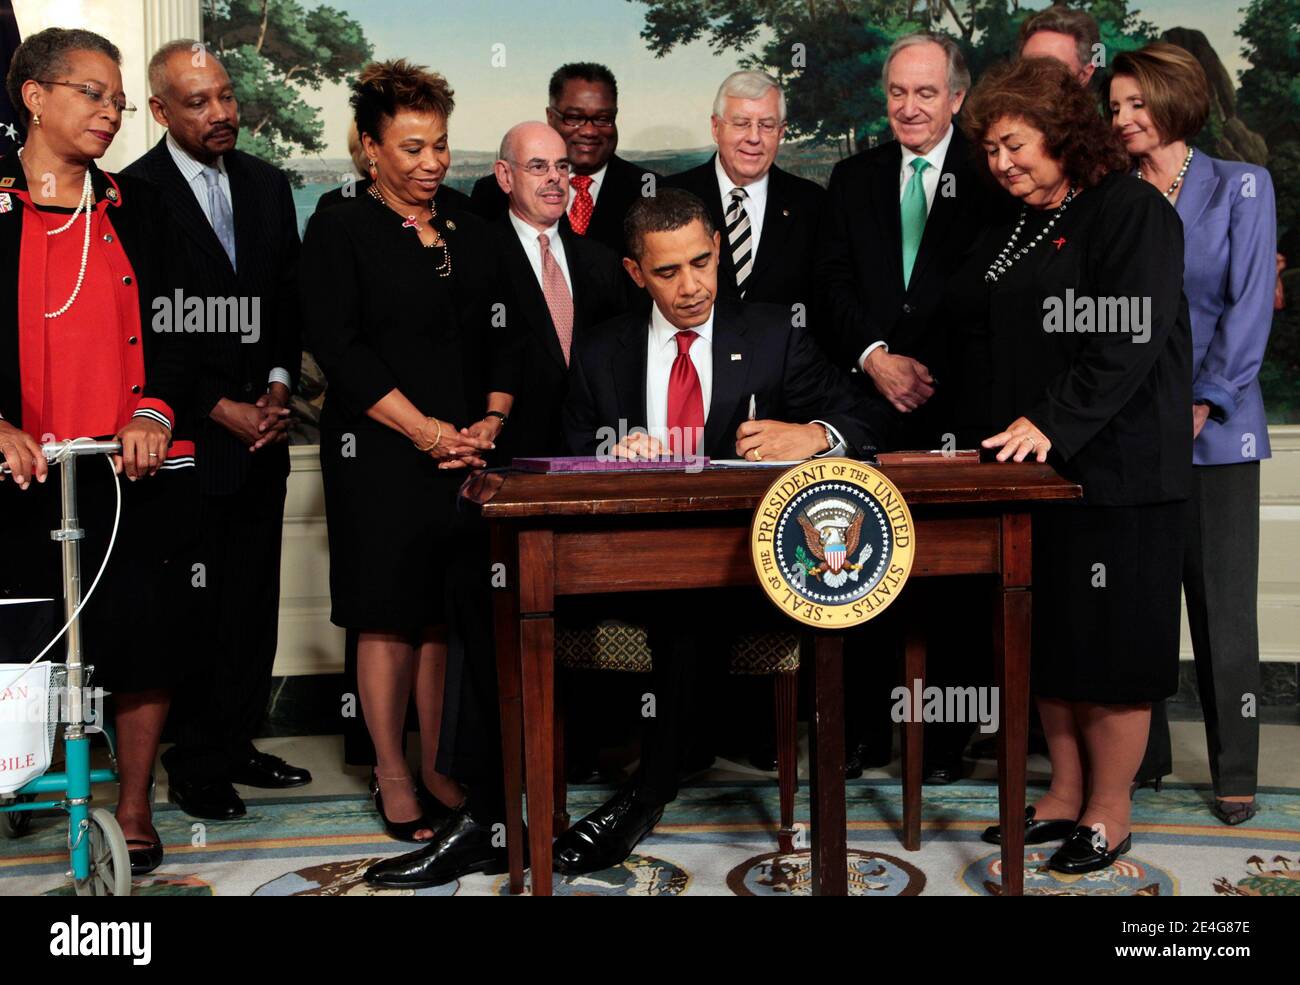 President Barack Obama signs the Ryan White HIV/AIDS treatment extension act of 2009 in the Diplomatic Room of the White House in Washington, DC, USA on October 30, 2009. Obama is surrounded by members of Congress, and Ryan White's mother Jeanne (2R). Photo by Aude Guerrucci/ABACAPRESS.COM Stock Photo